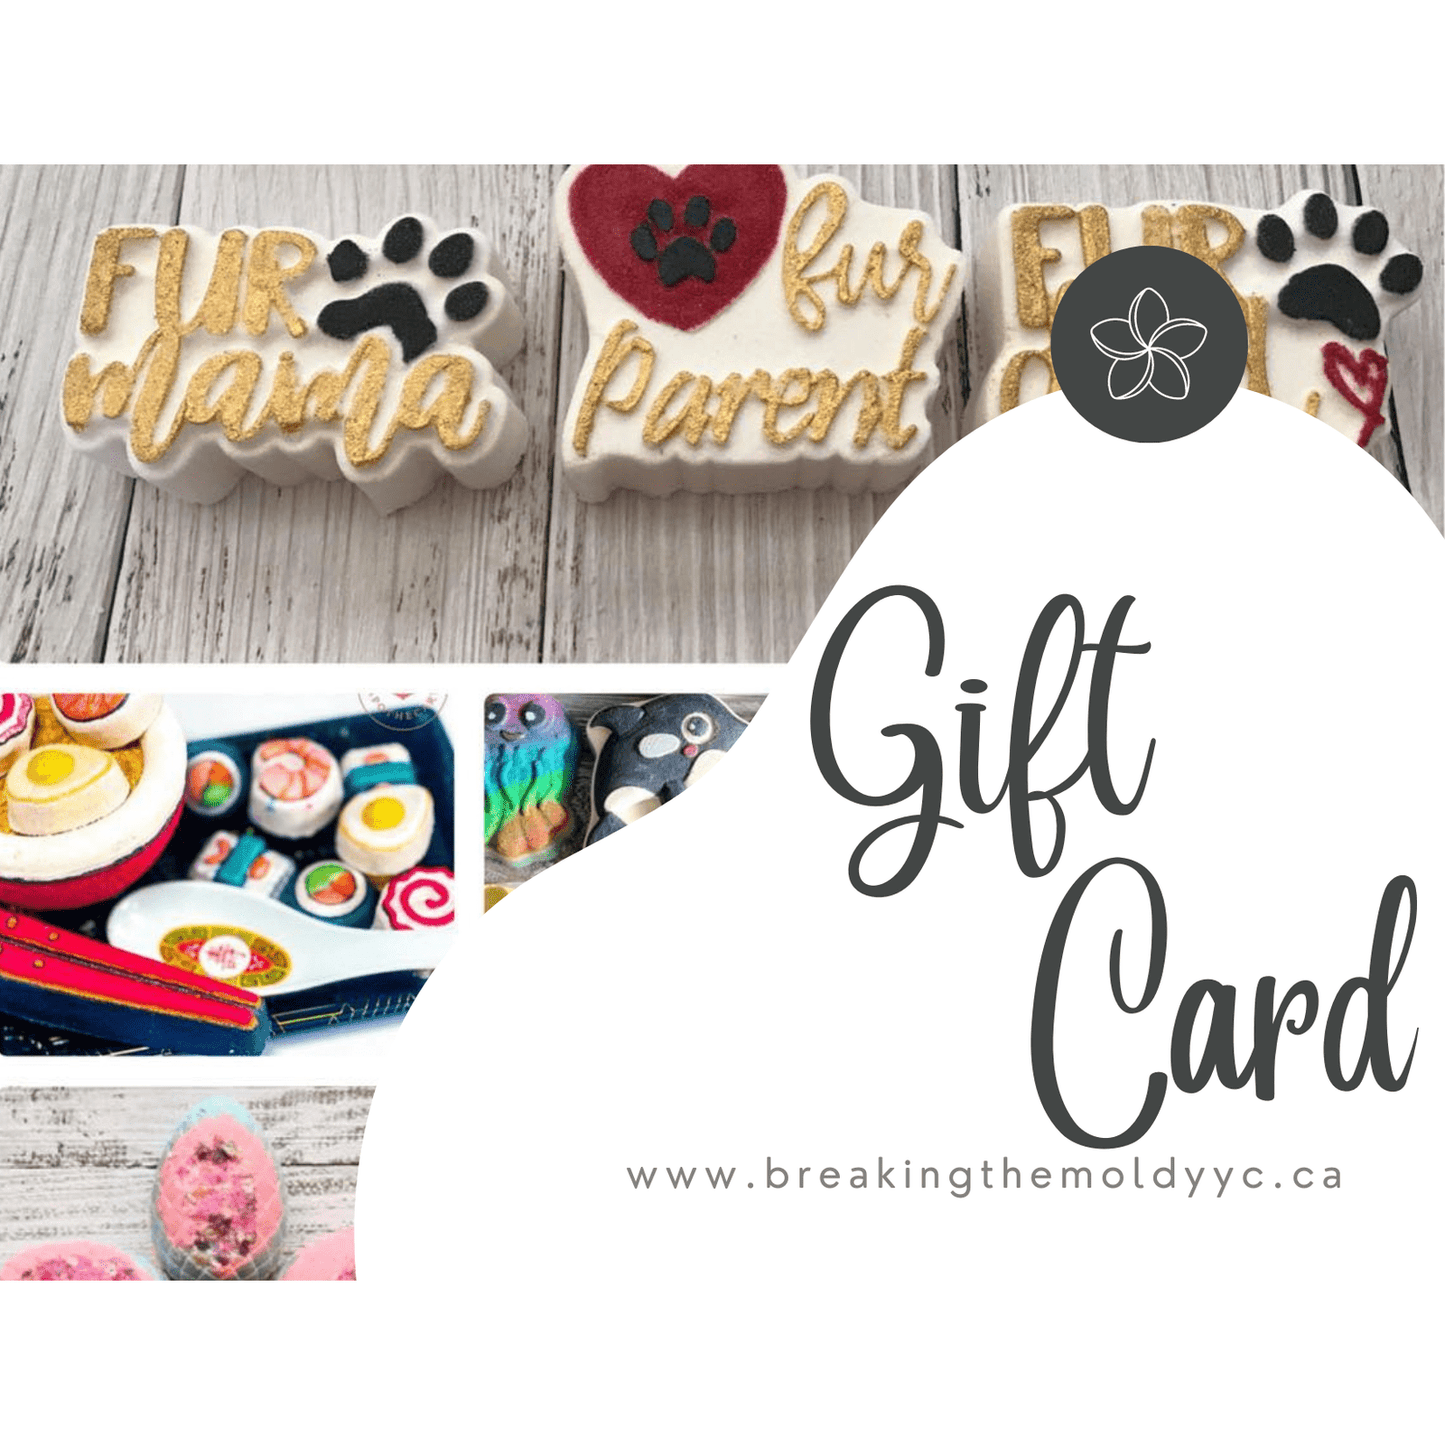 Breaking the Mold YYC Gift Card